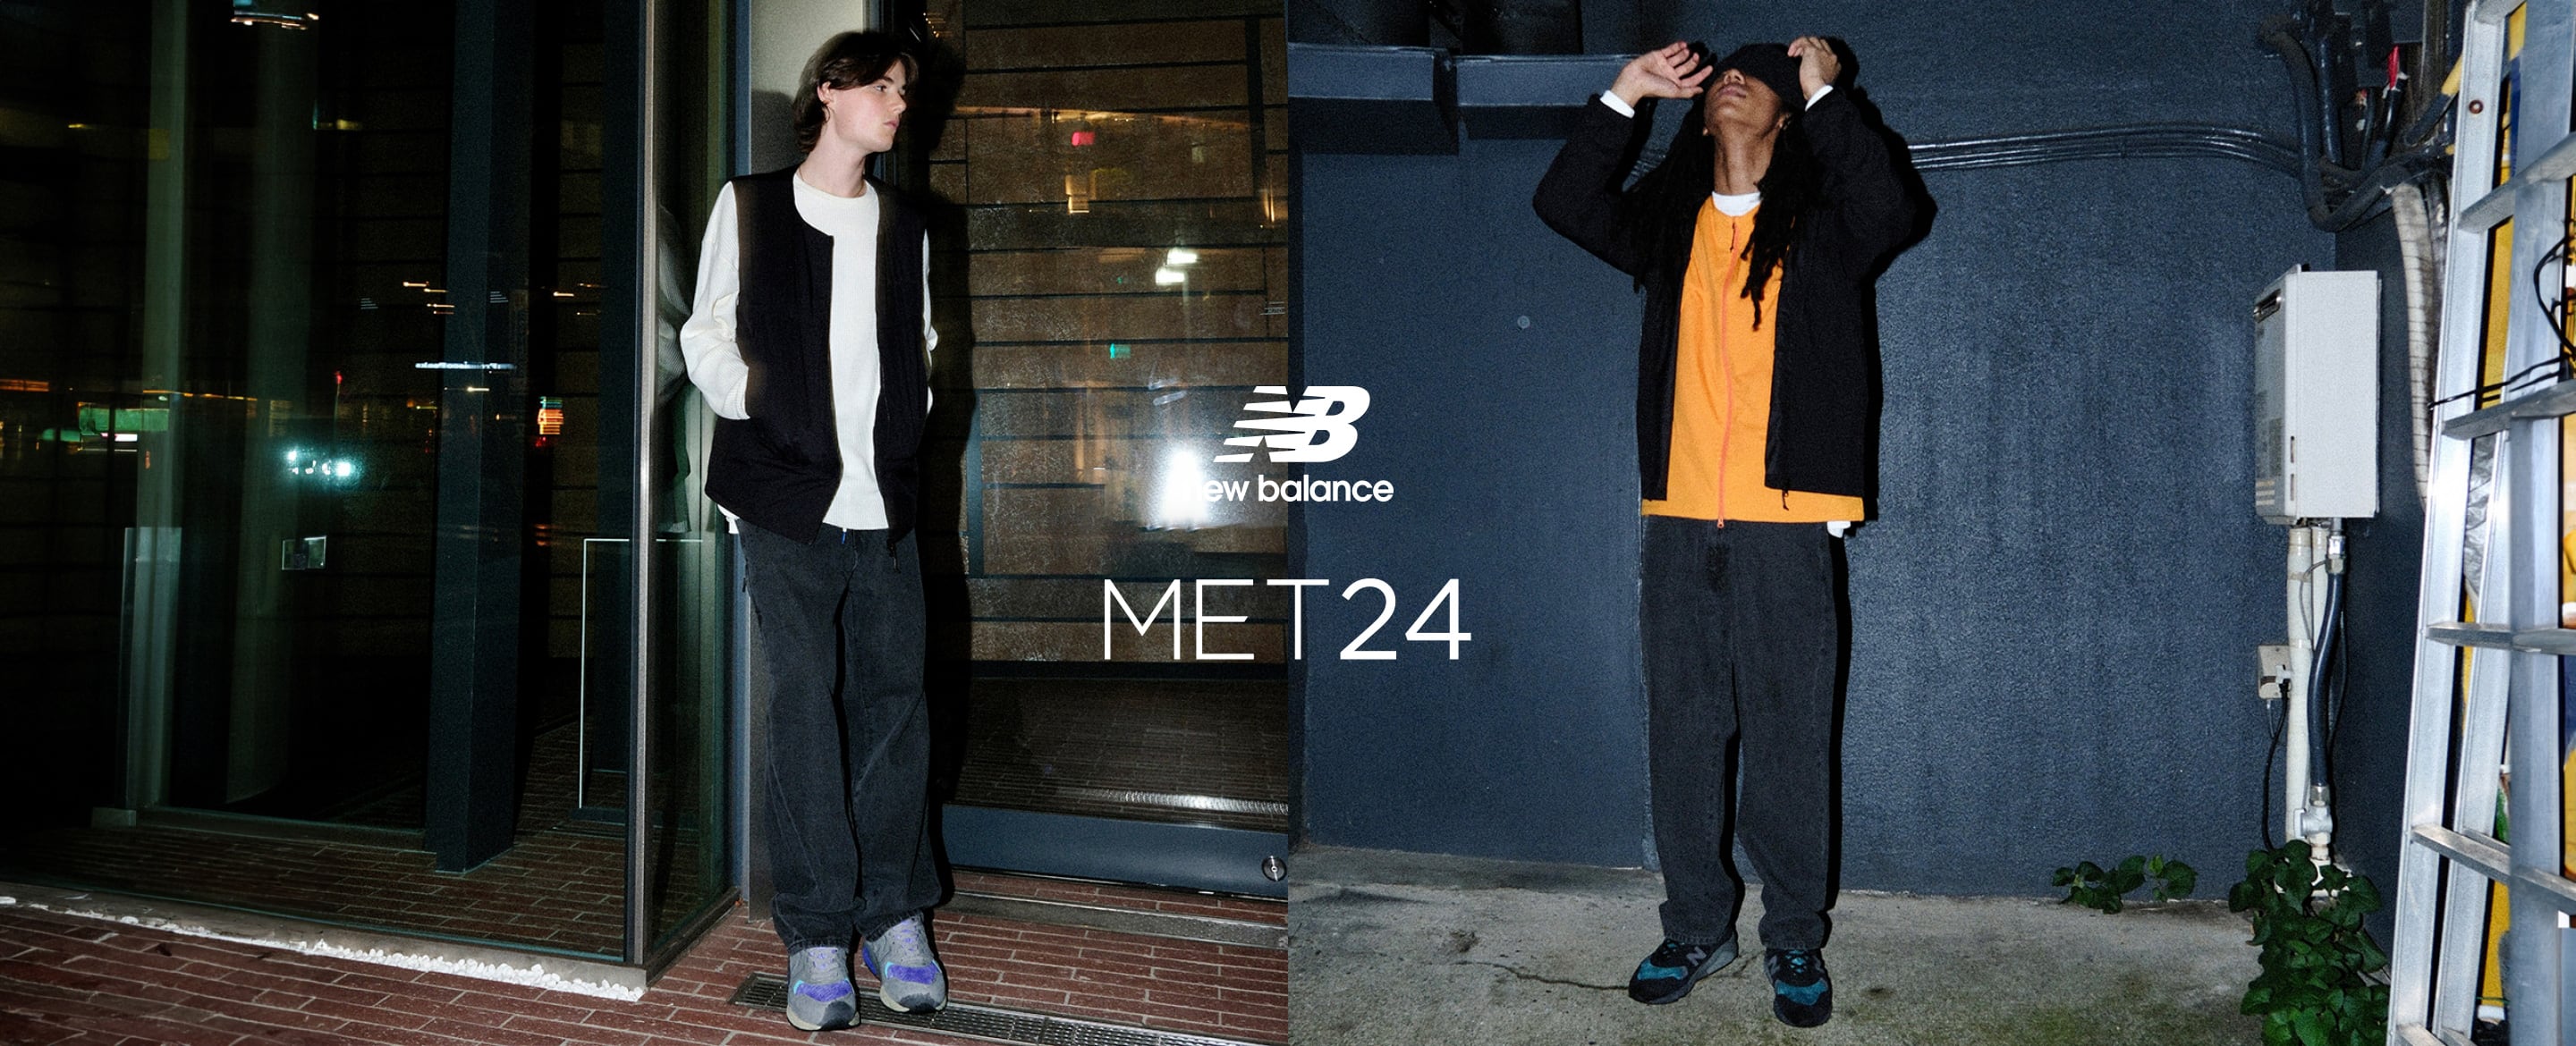 "New Balance MET24 COLLECTION"